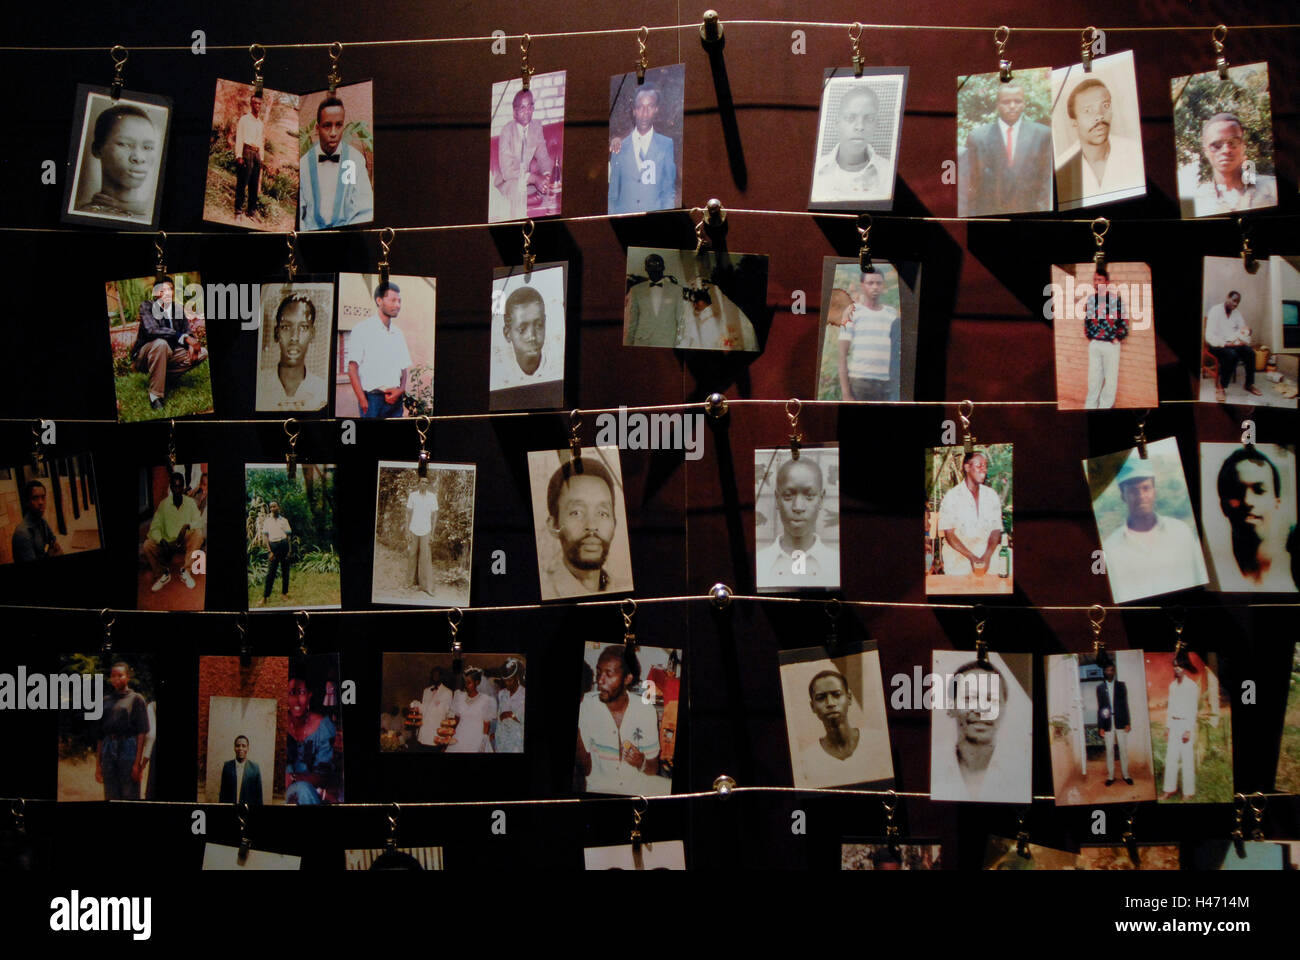 RWANDA Kigali Genocide Memorial located in Gisozil, during the genocide in April 1994 nearly one Million Tutsi were killed by Hutu murder, displayed historical images of murdered Tutsi victims Stock Photo